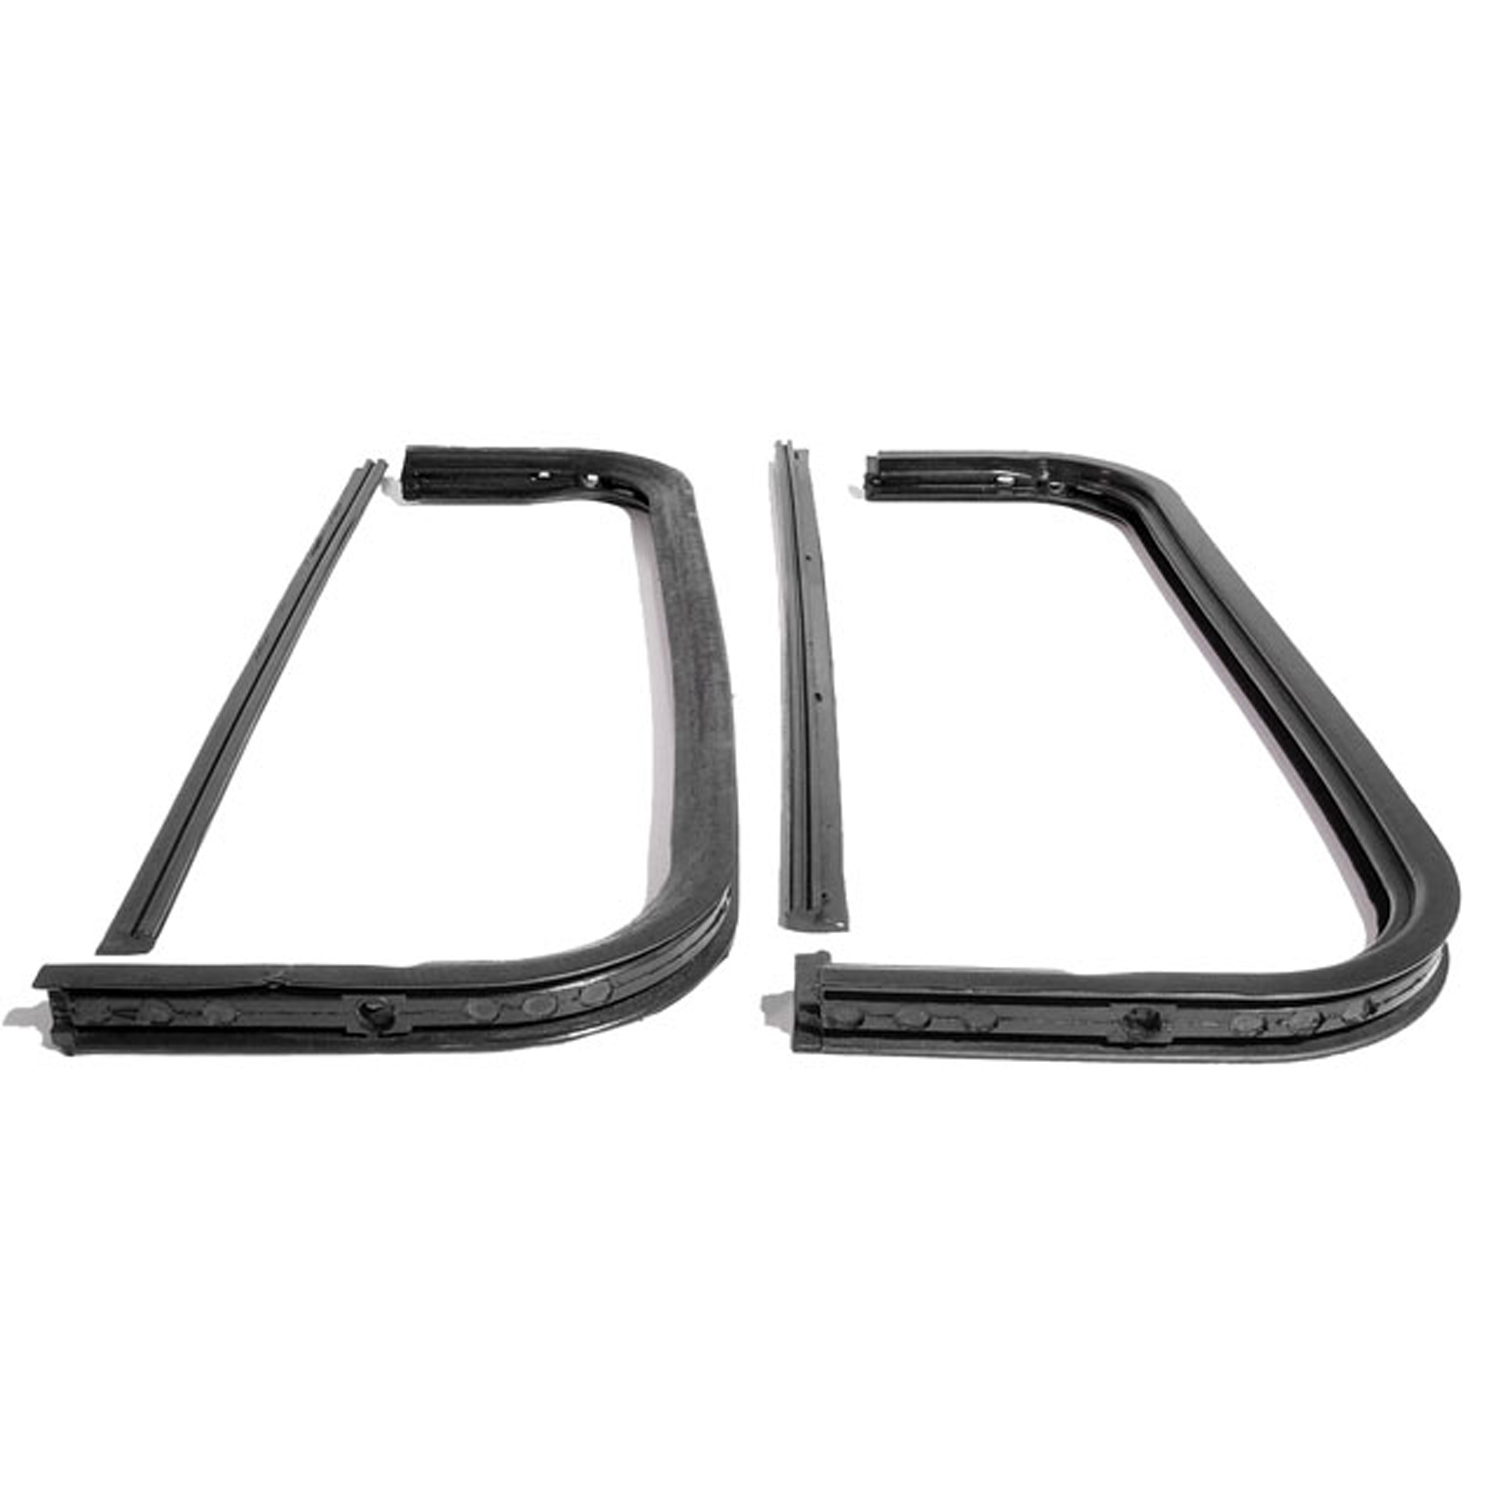 1961 Chevrolet C20 Pickup Vent Window Seals with Division Post Seals-WR 1900